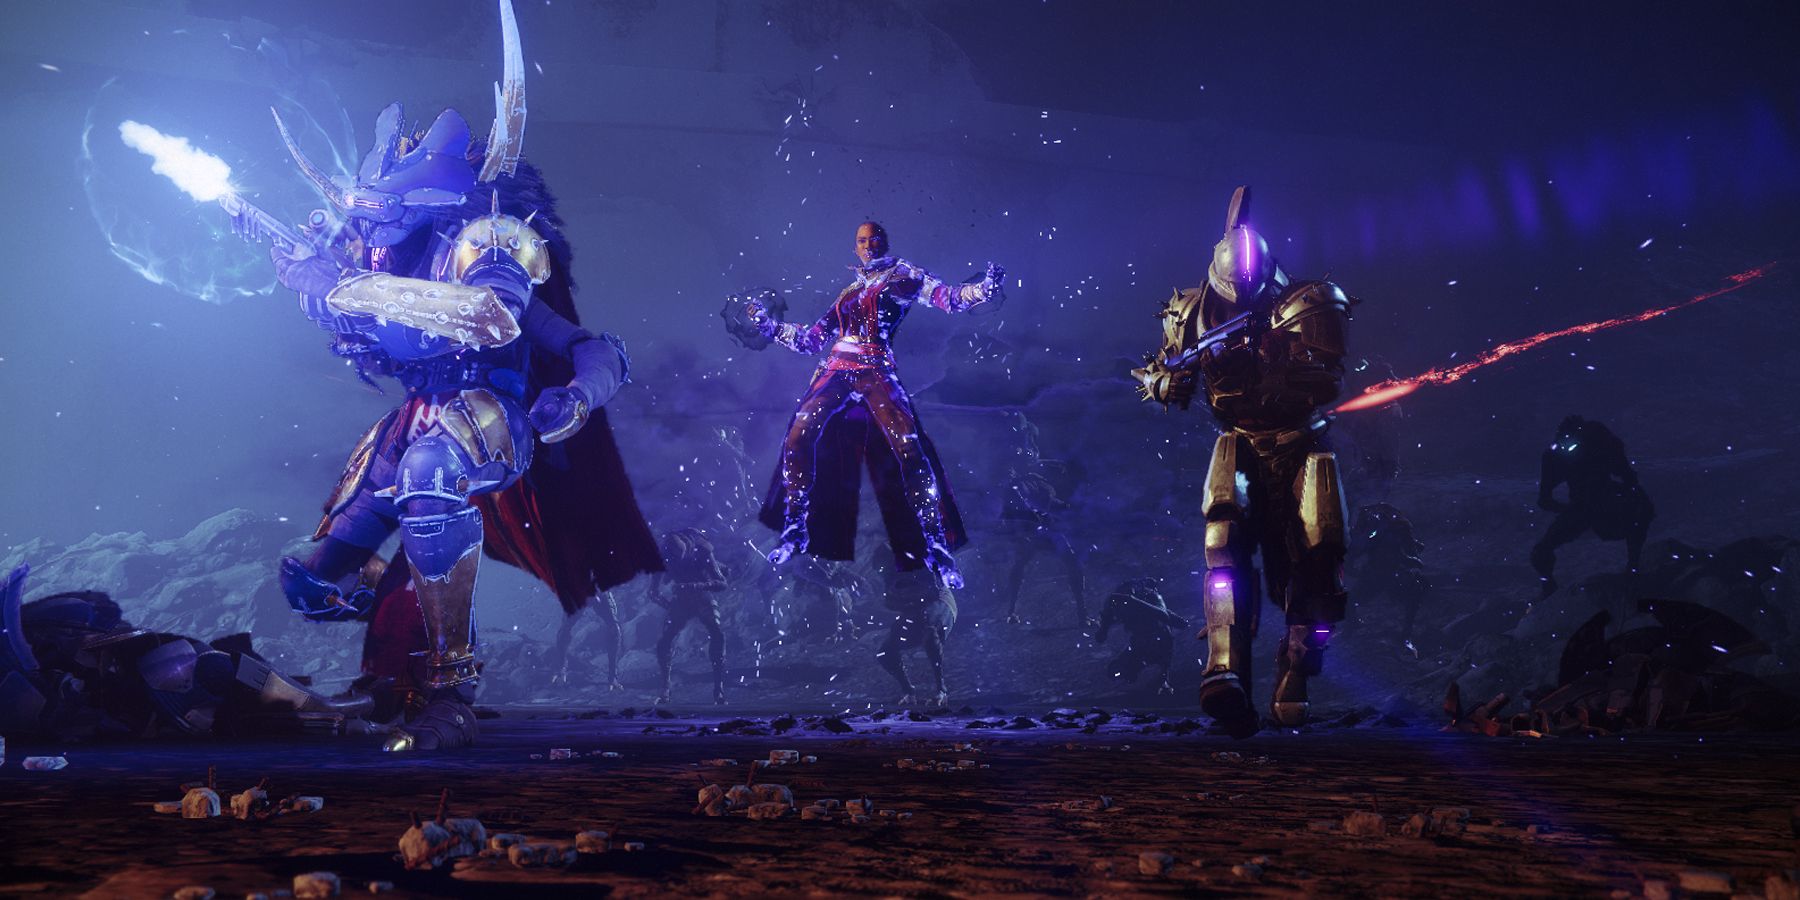 Mithrax, Ikora, and Saint 14 fight off Vex in the Eliksni quarter at the end of Destiny 2's Season of the Splicer.